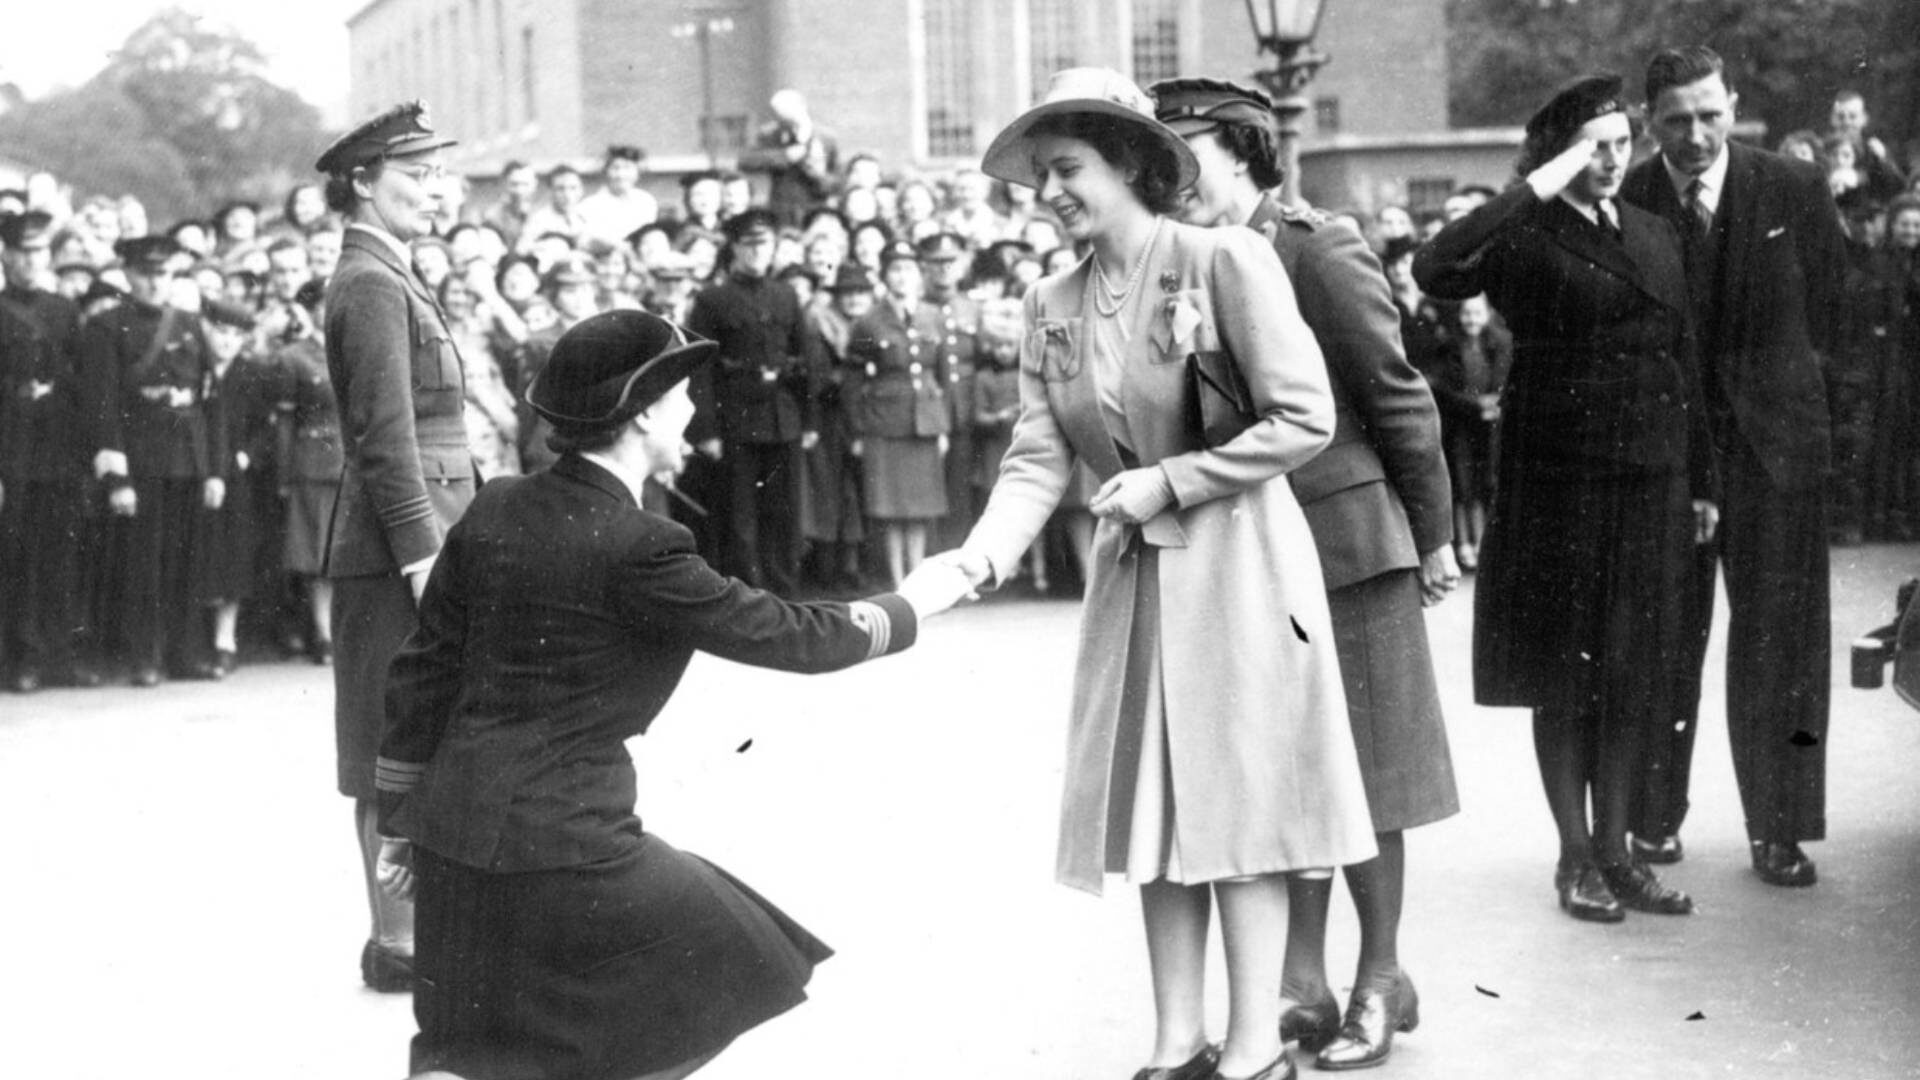 Princess Elizabeth meets with Chief Officer M.E. King of the Women's Royal Naval Service at Queen's University, Belfast. Photo taken on 18th July 1945.